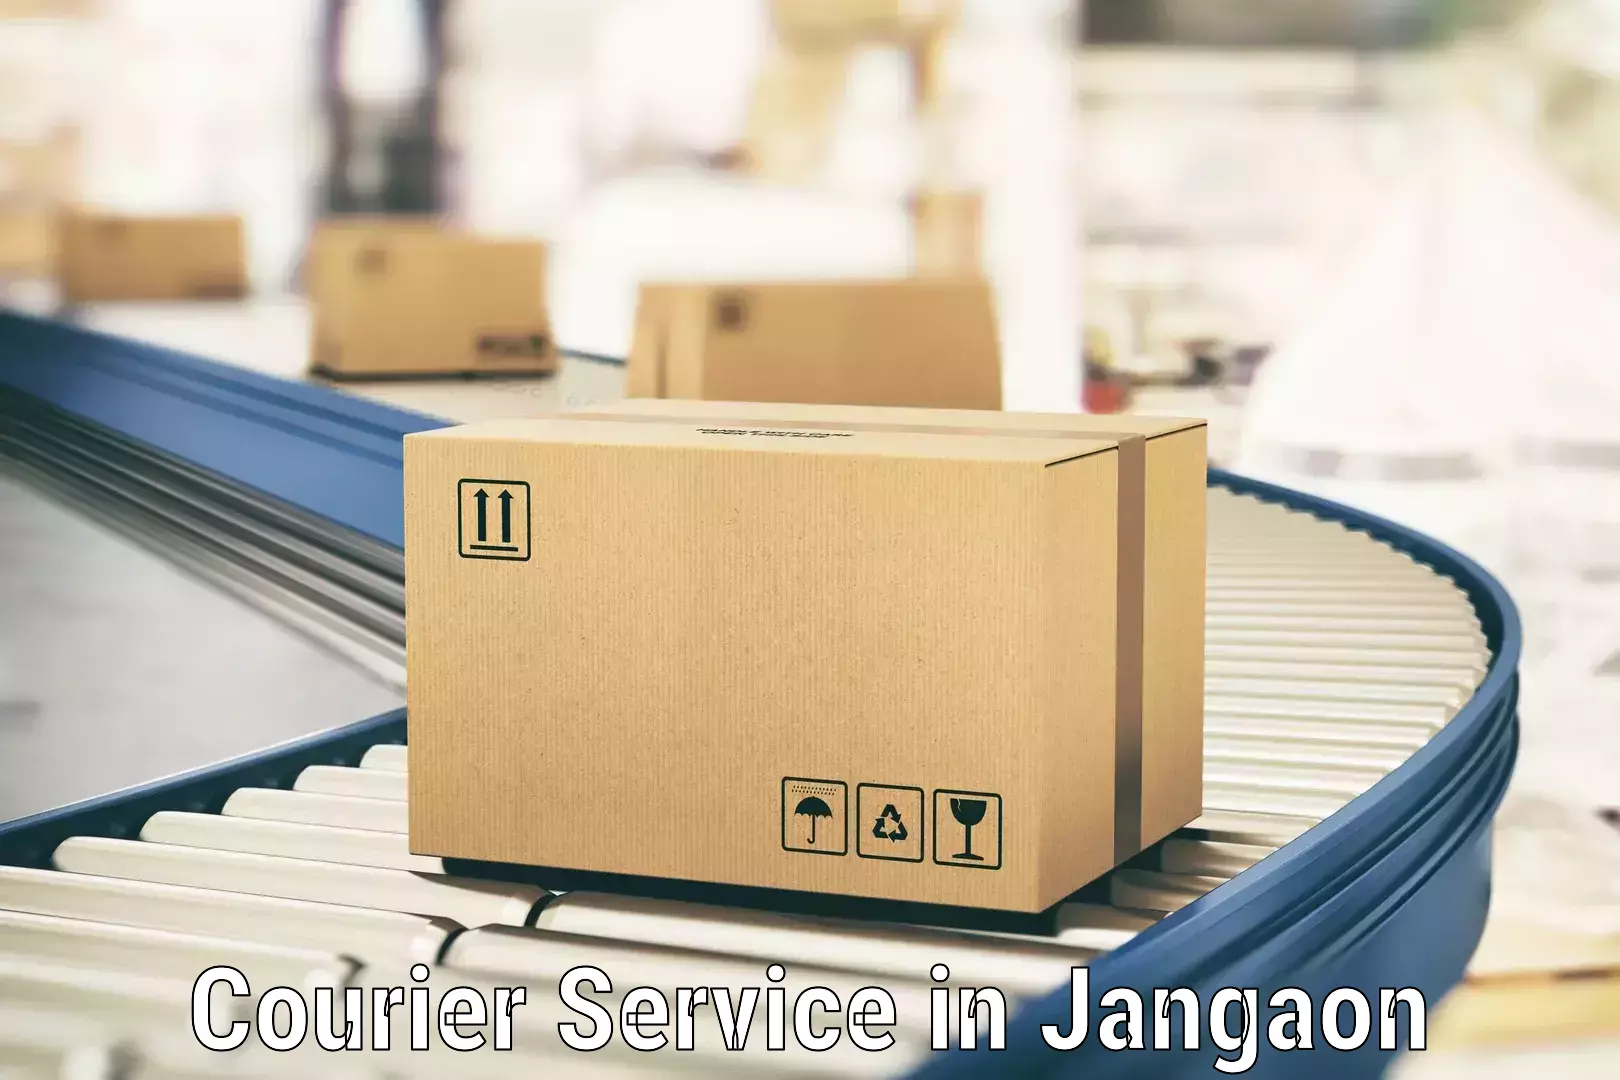 Comprehensive delivery network in Jangaon